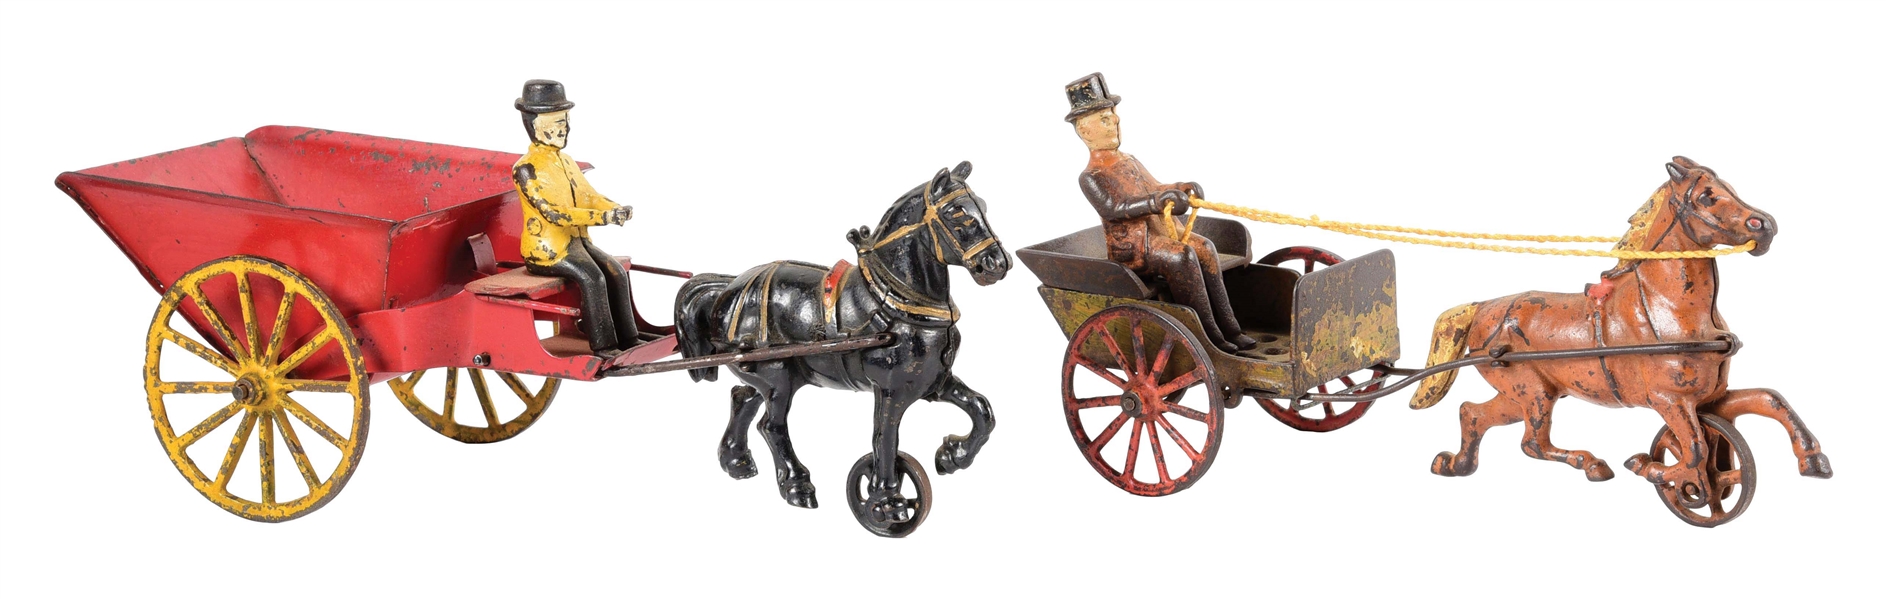 LOT OF 2: HORSE-DRAWN TOYS.